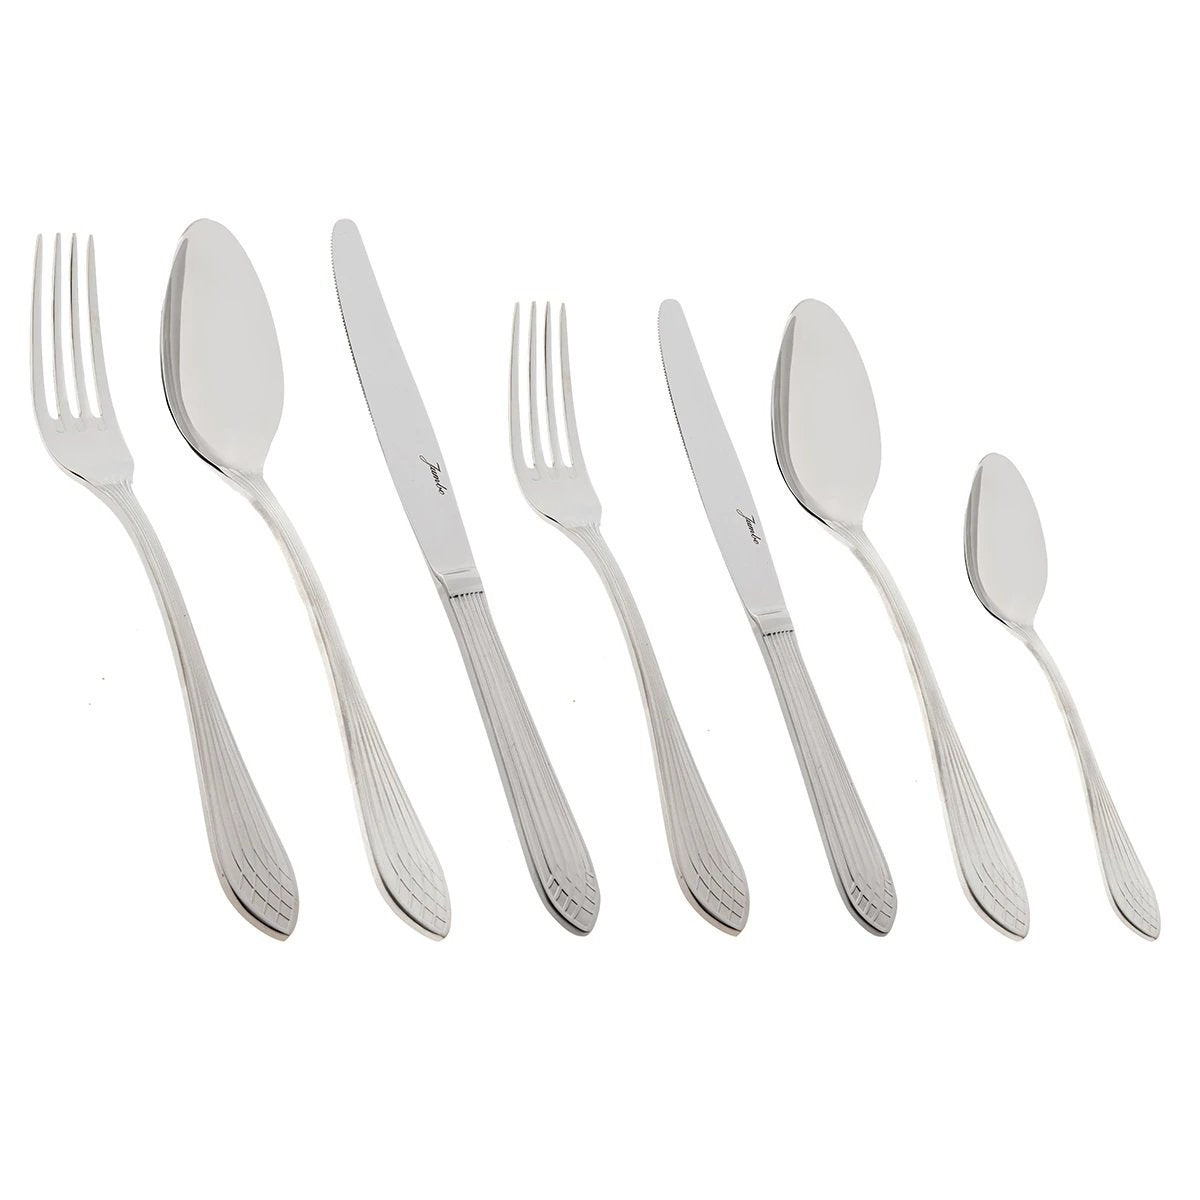 4100 STAINLESS STEEL FLATWARE SETS 84 PCS FOR 12 PERSON